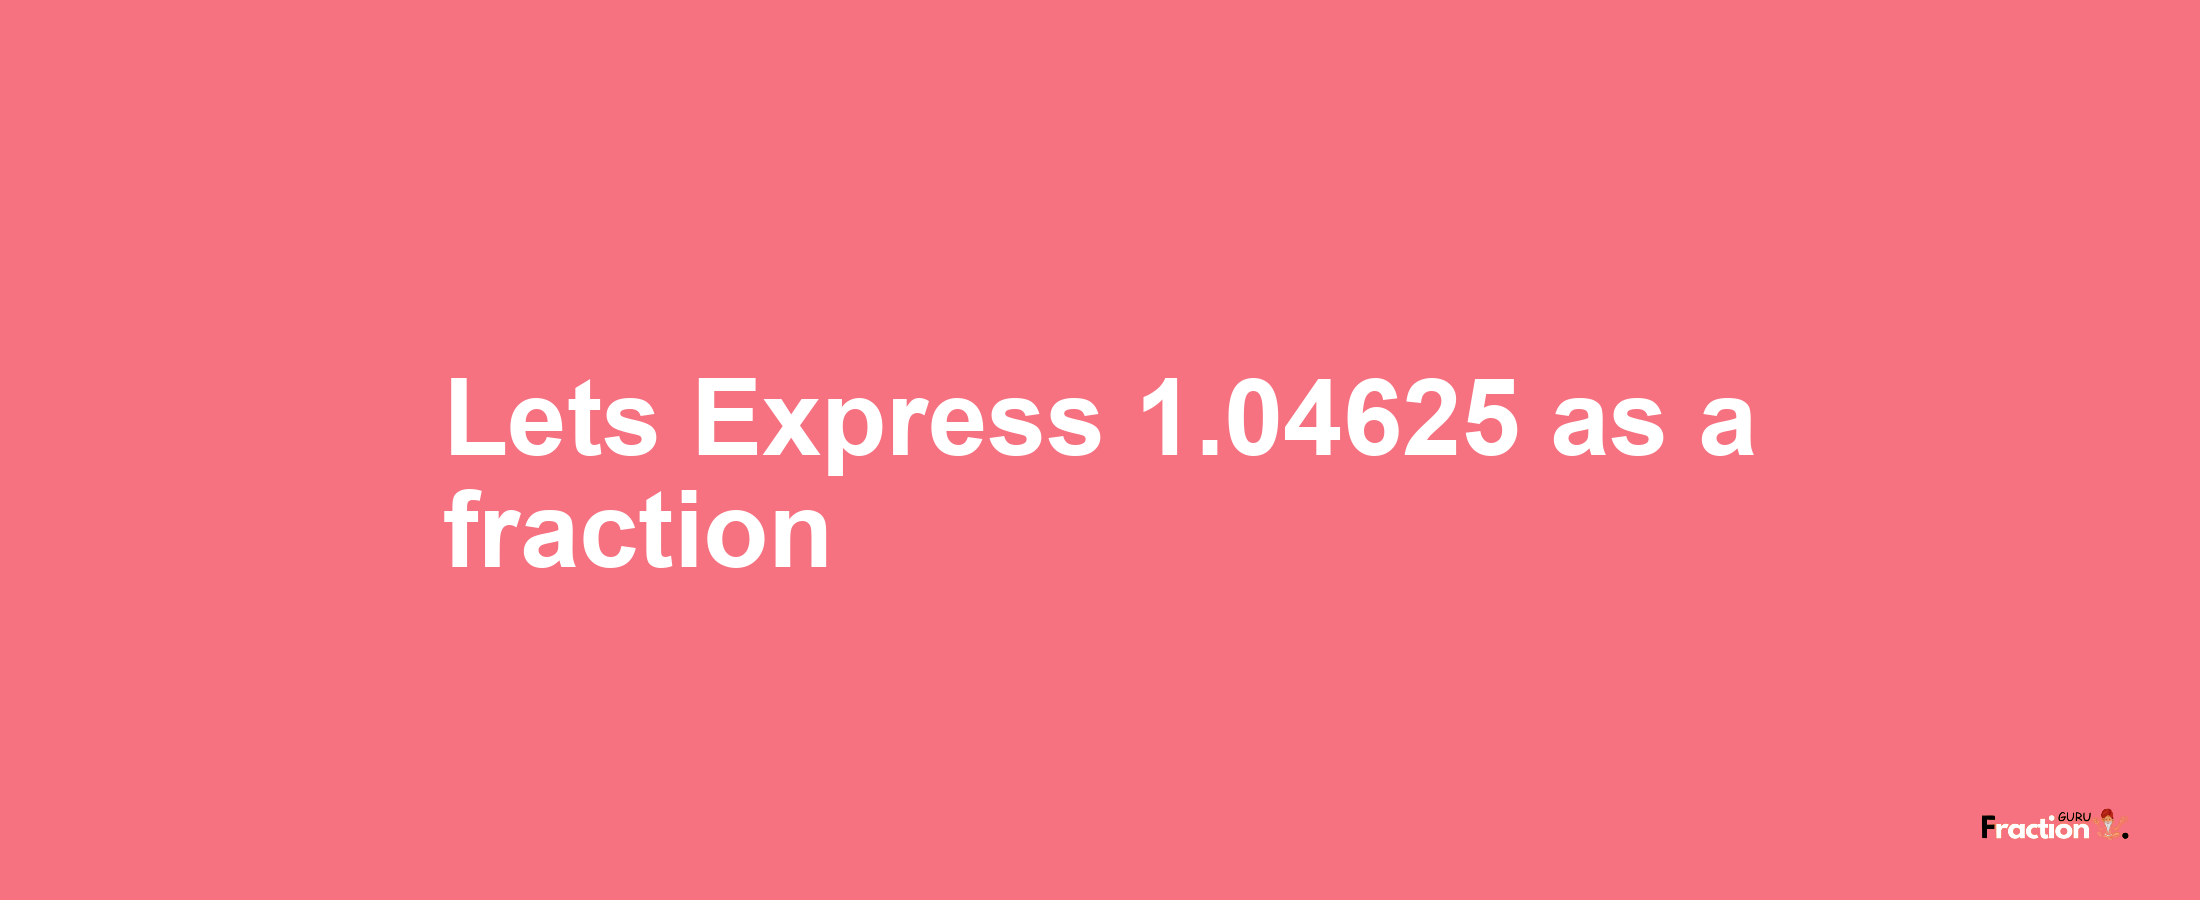 Lets Express 1.04625 as afraction